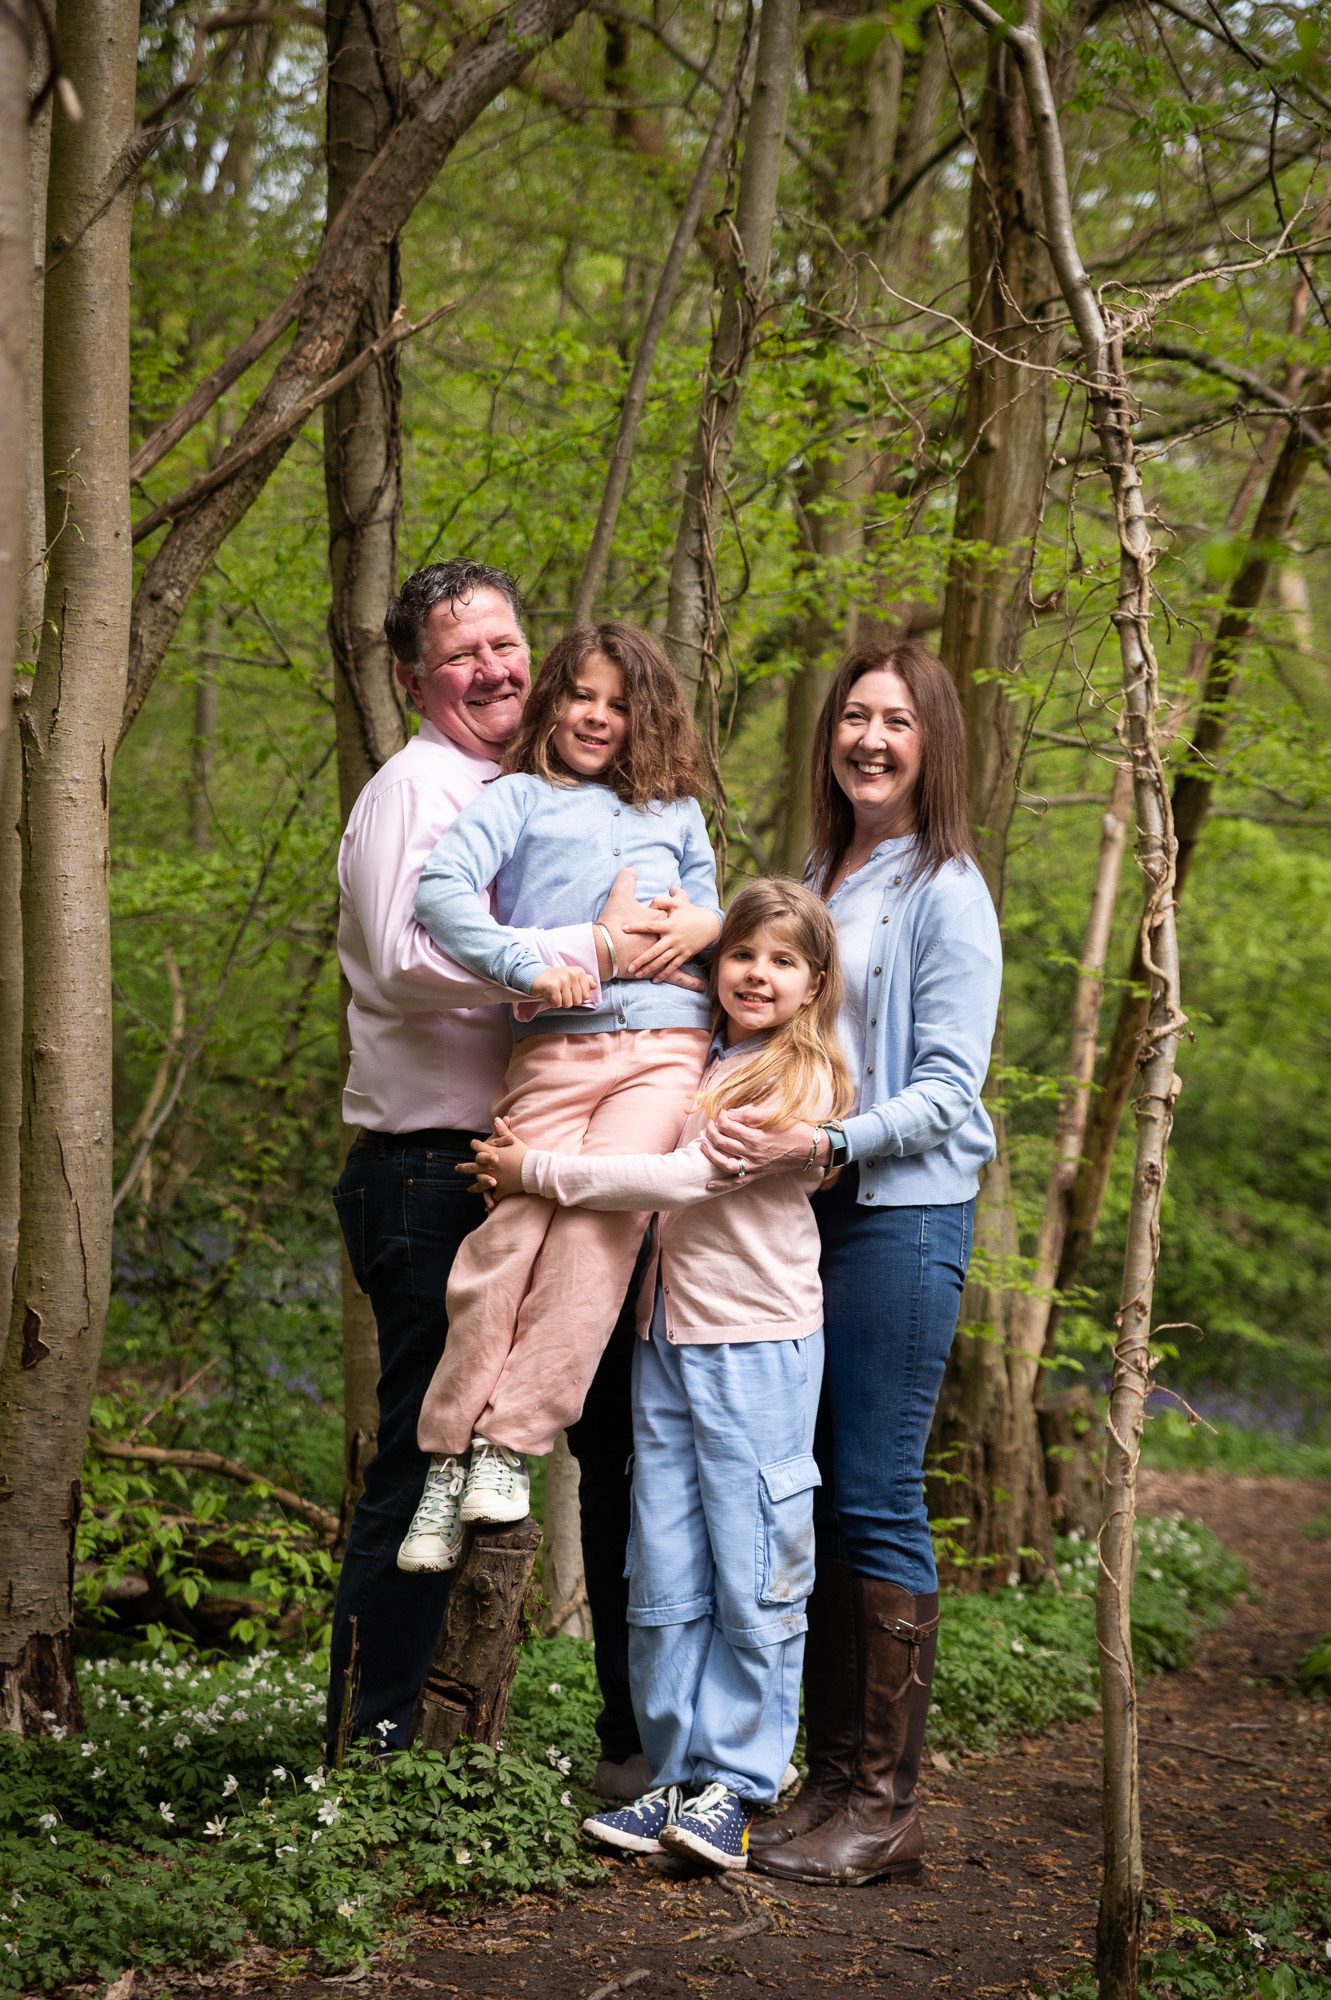 Outdoor family photoshoots in the woods - twin girls and a family cuddle.